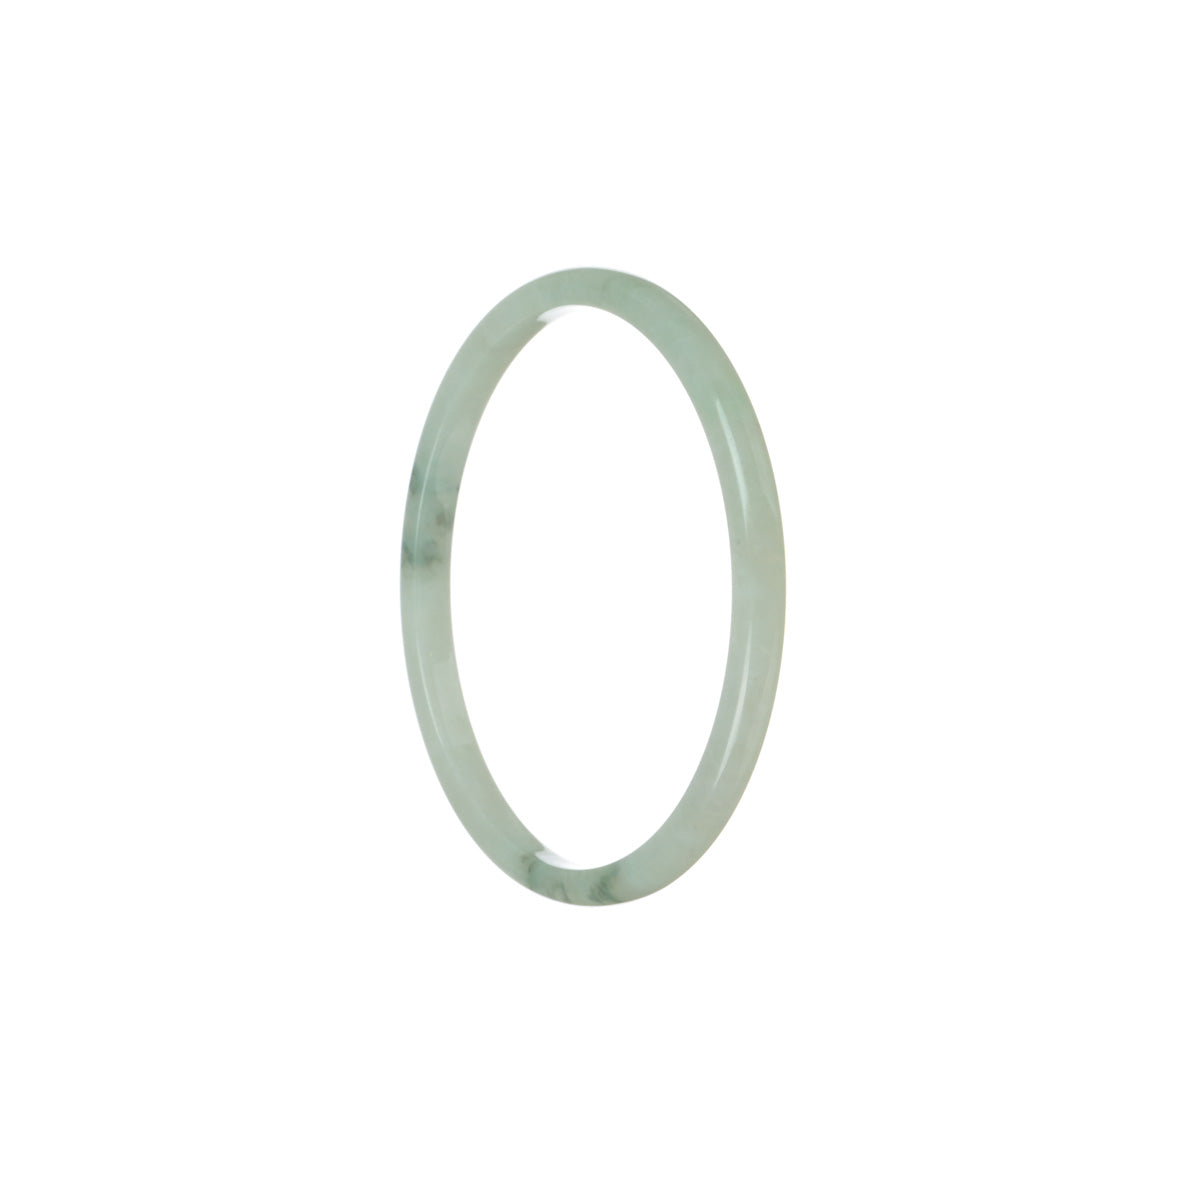 Image of a pale green Burmese jade bangle with a flat shape, showcasing its genuine and natural beauty.